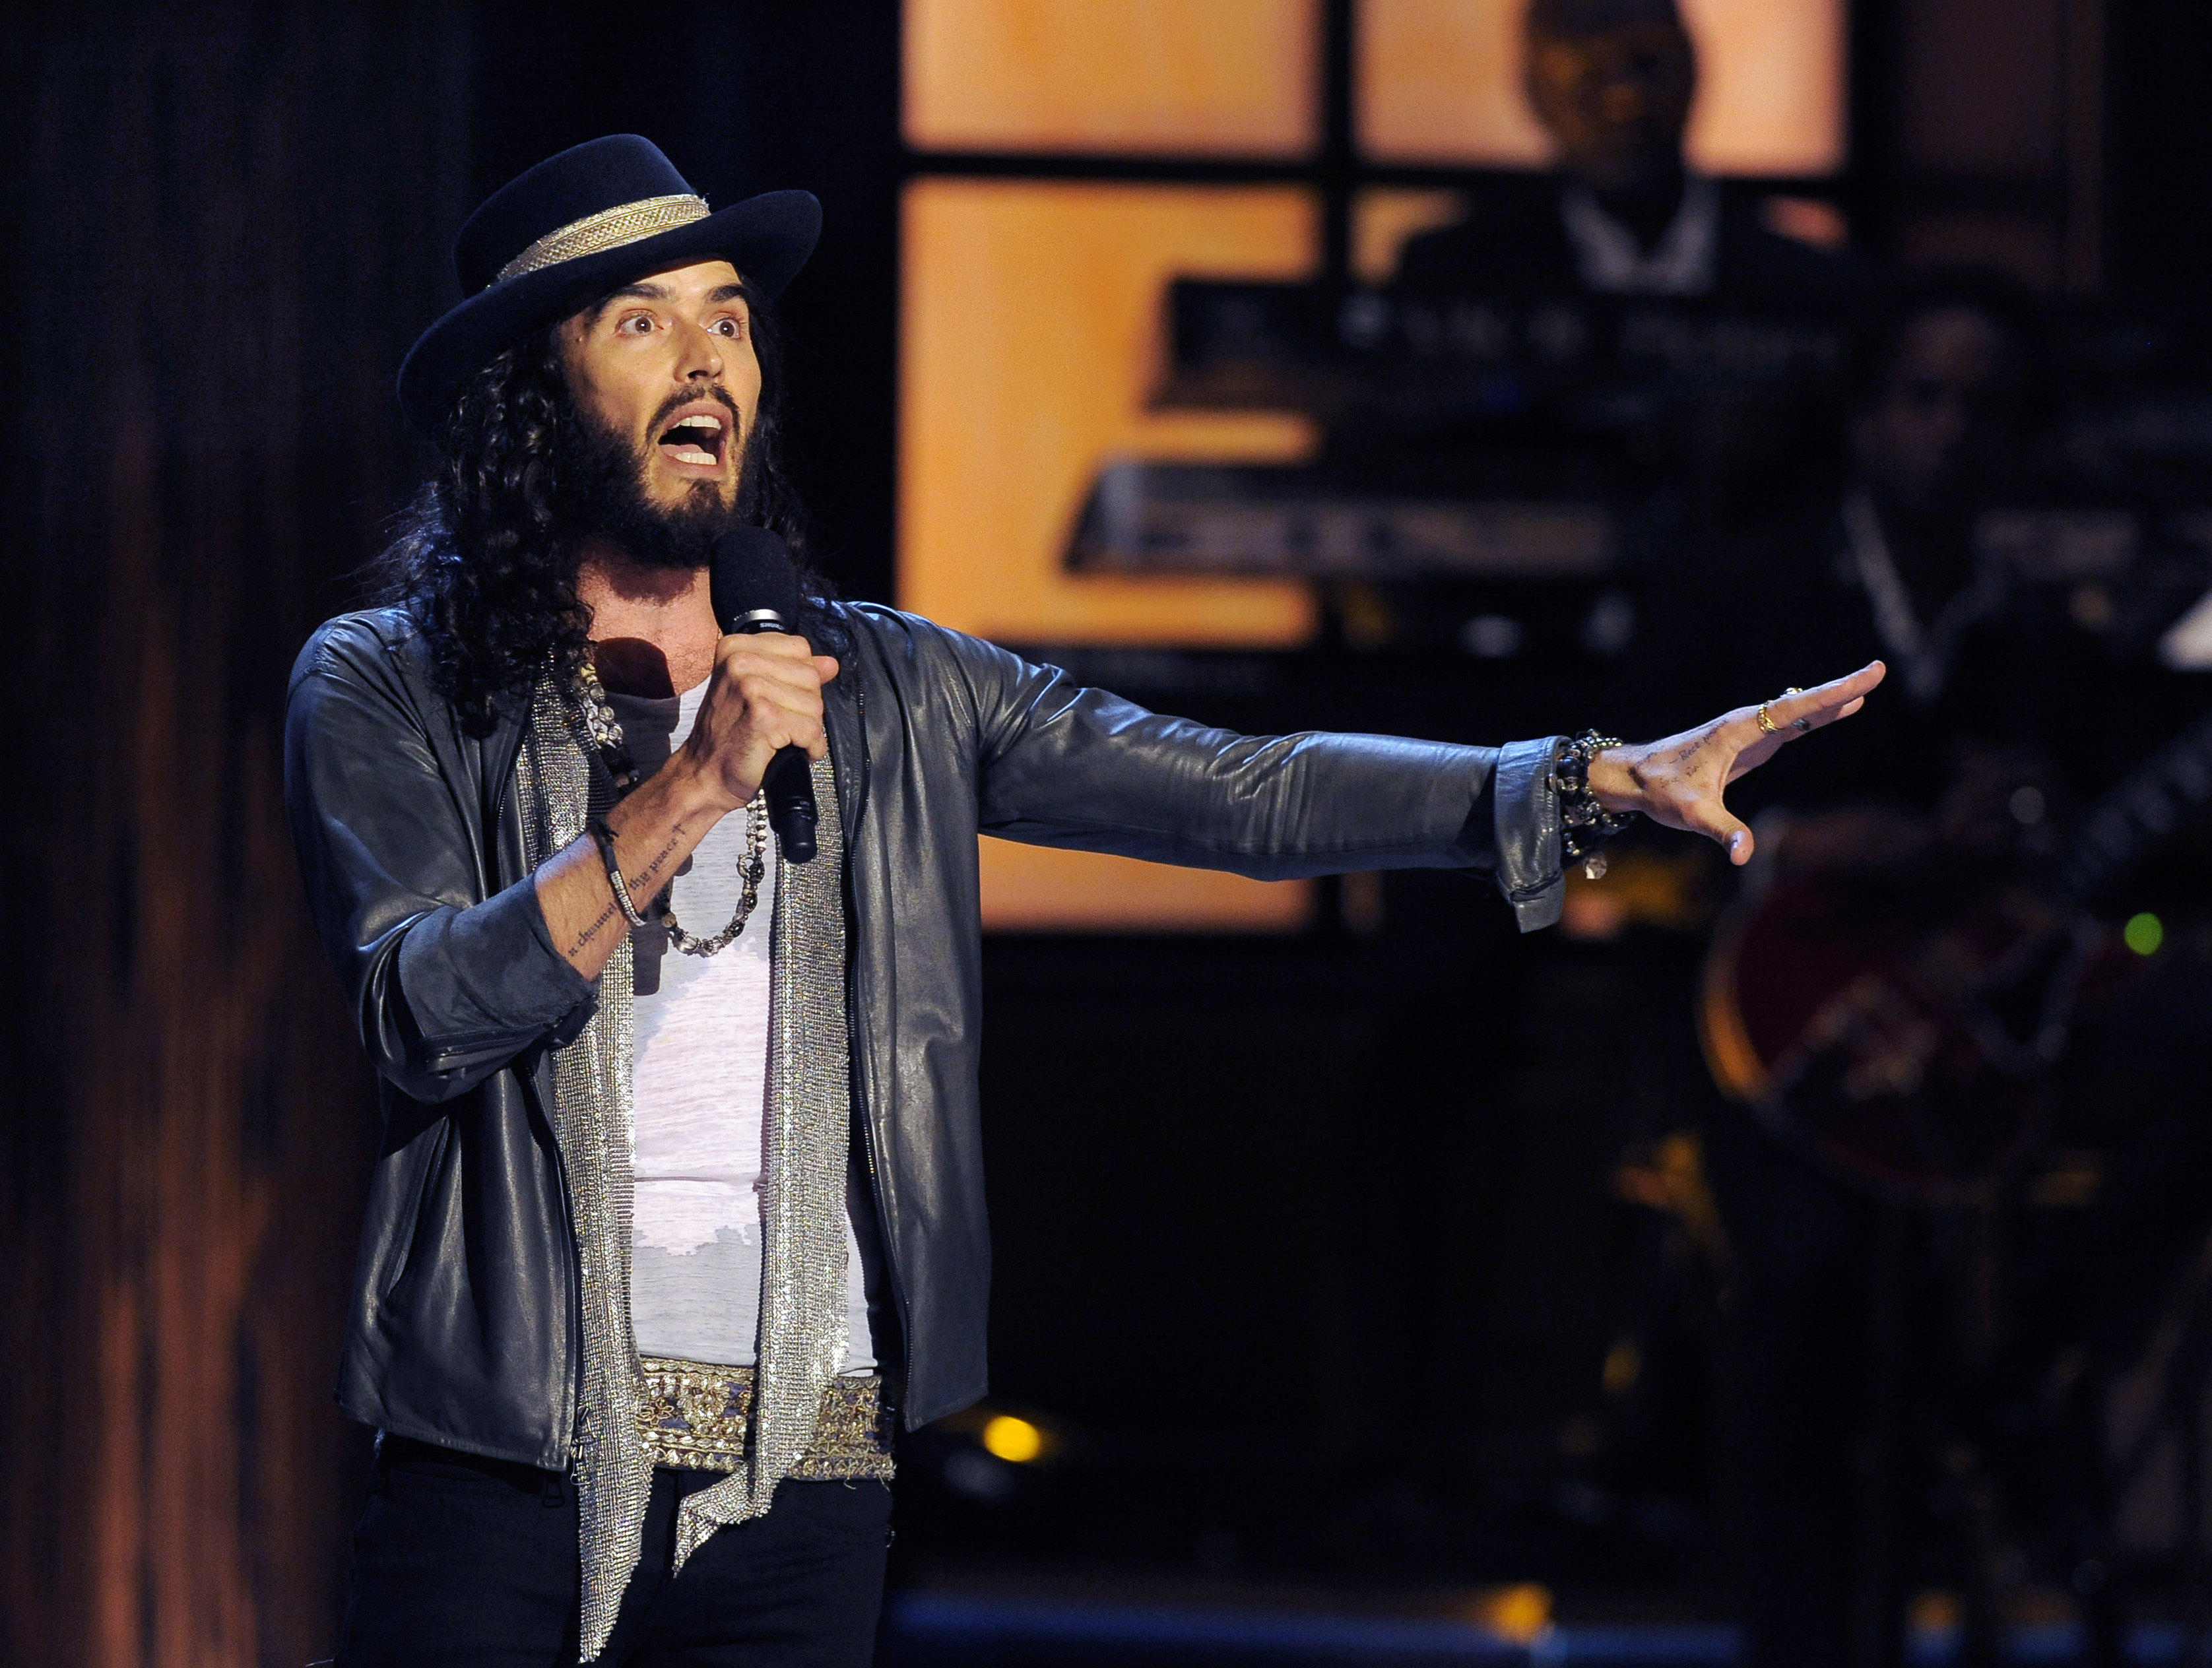 Comedian Russell Brand. Photo: Invision / AP